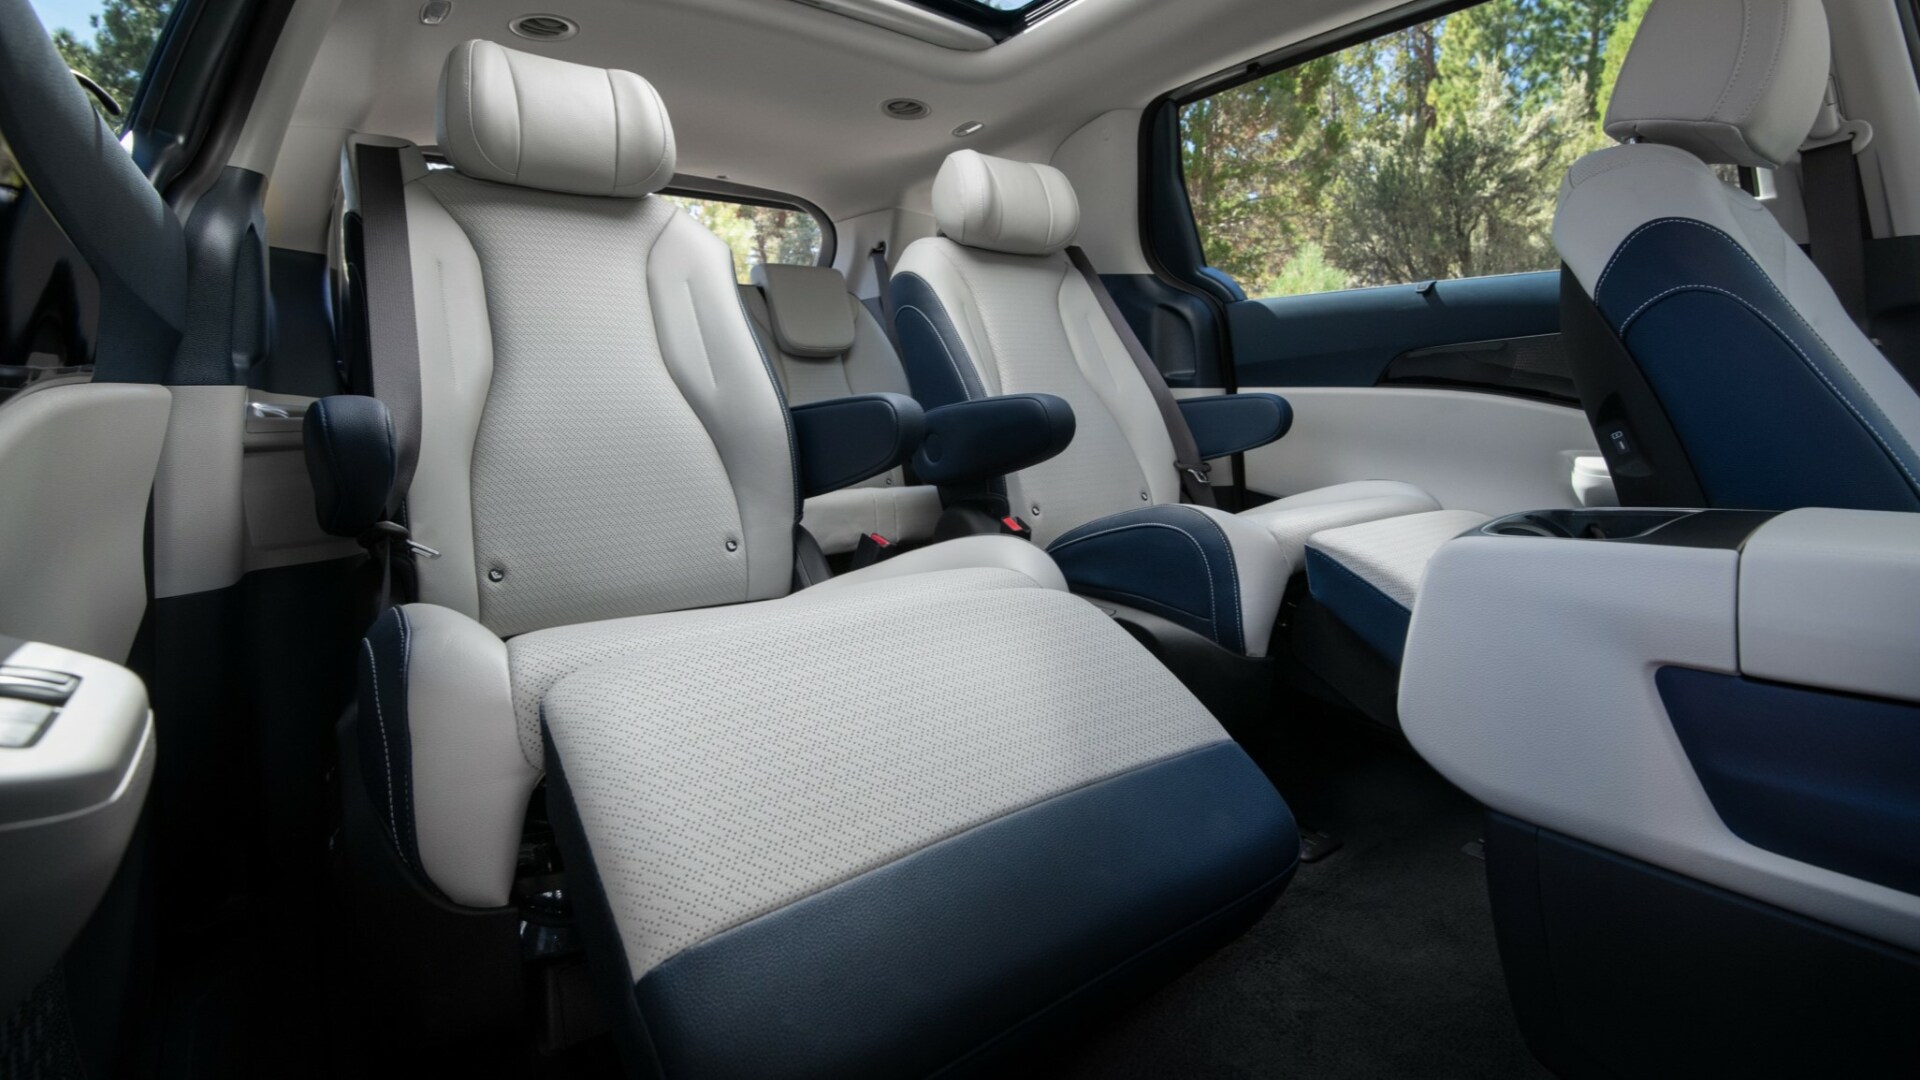 The Second Row Seats Of The 2025 Kia Carnival With Extendable Leg Rests (Credis Kia)